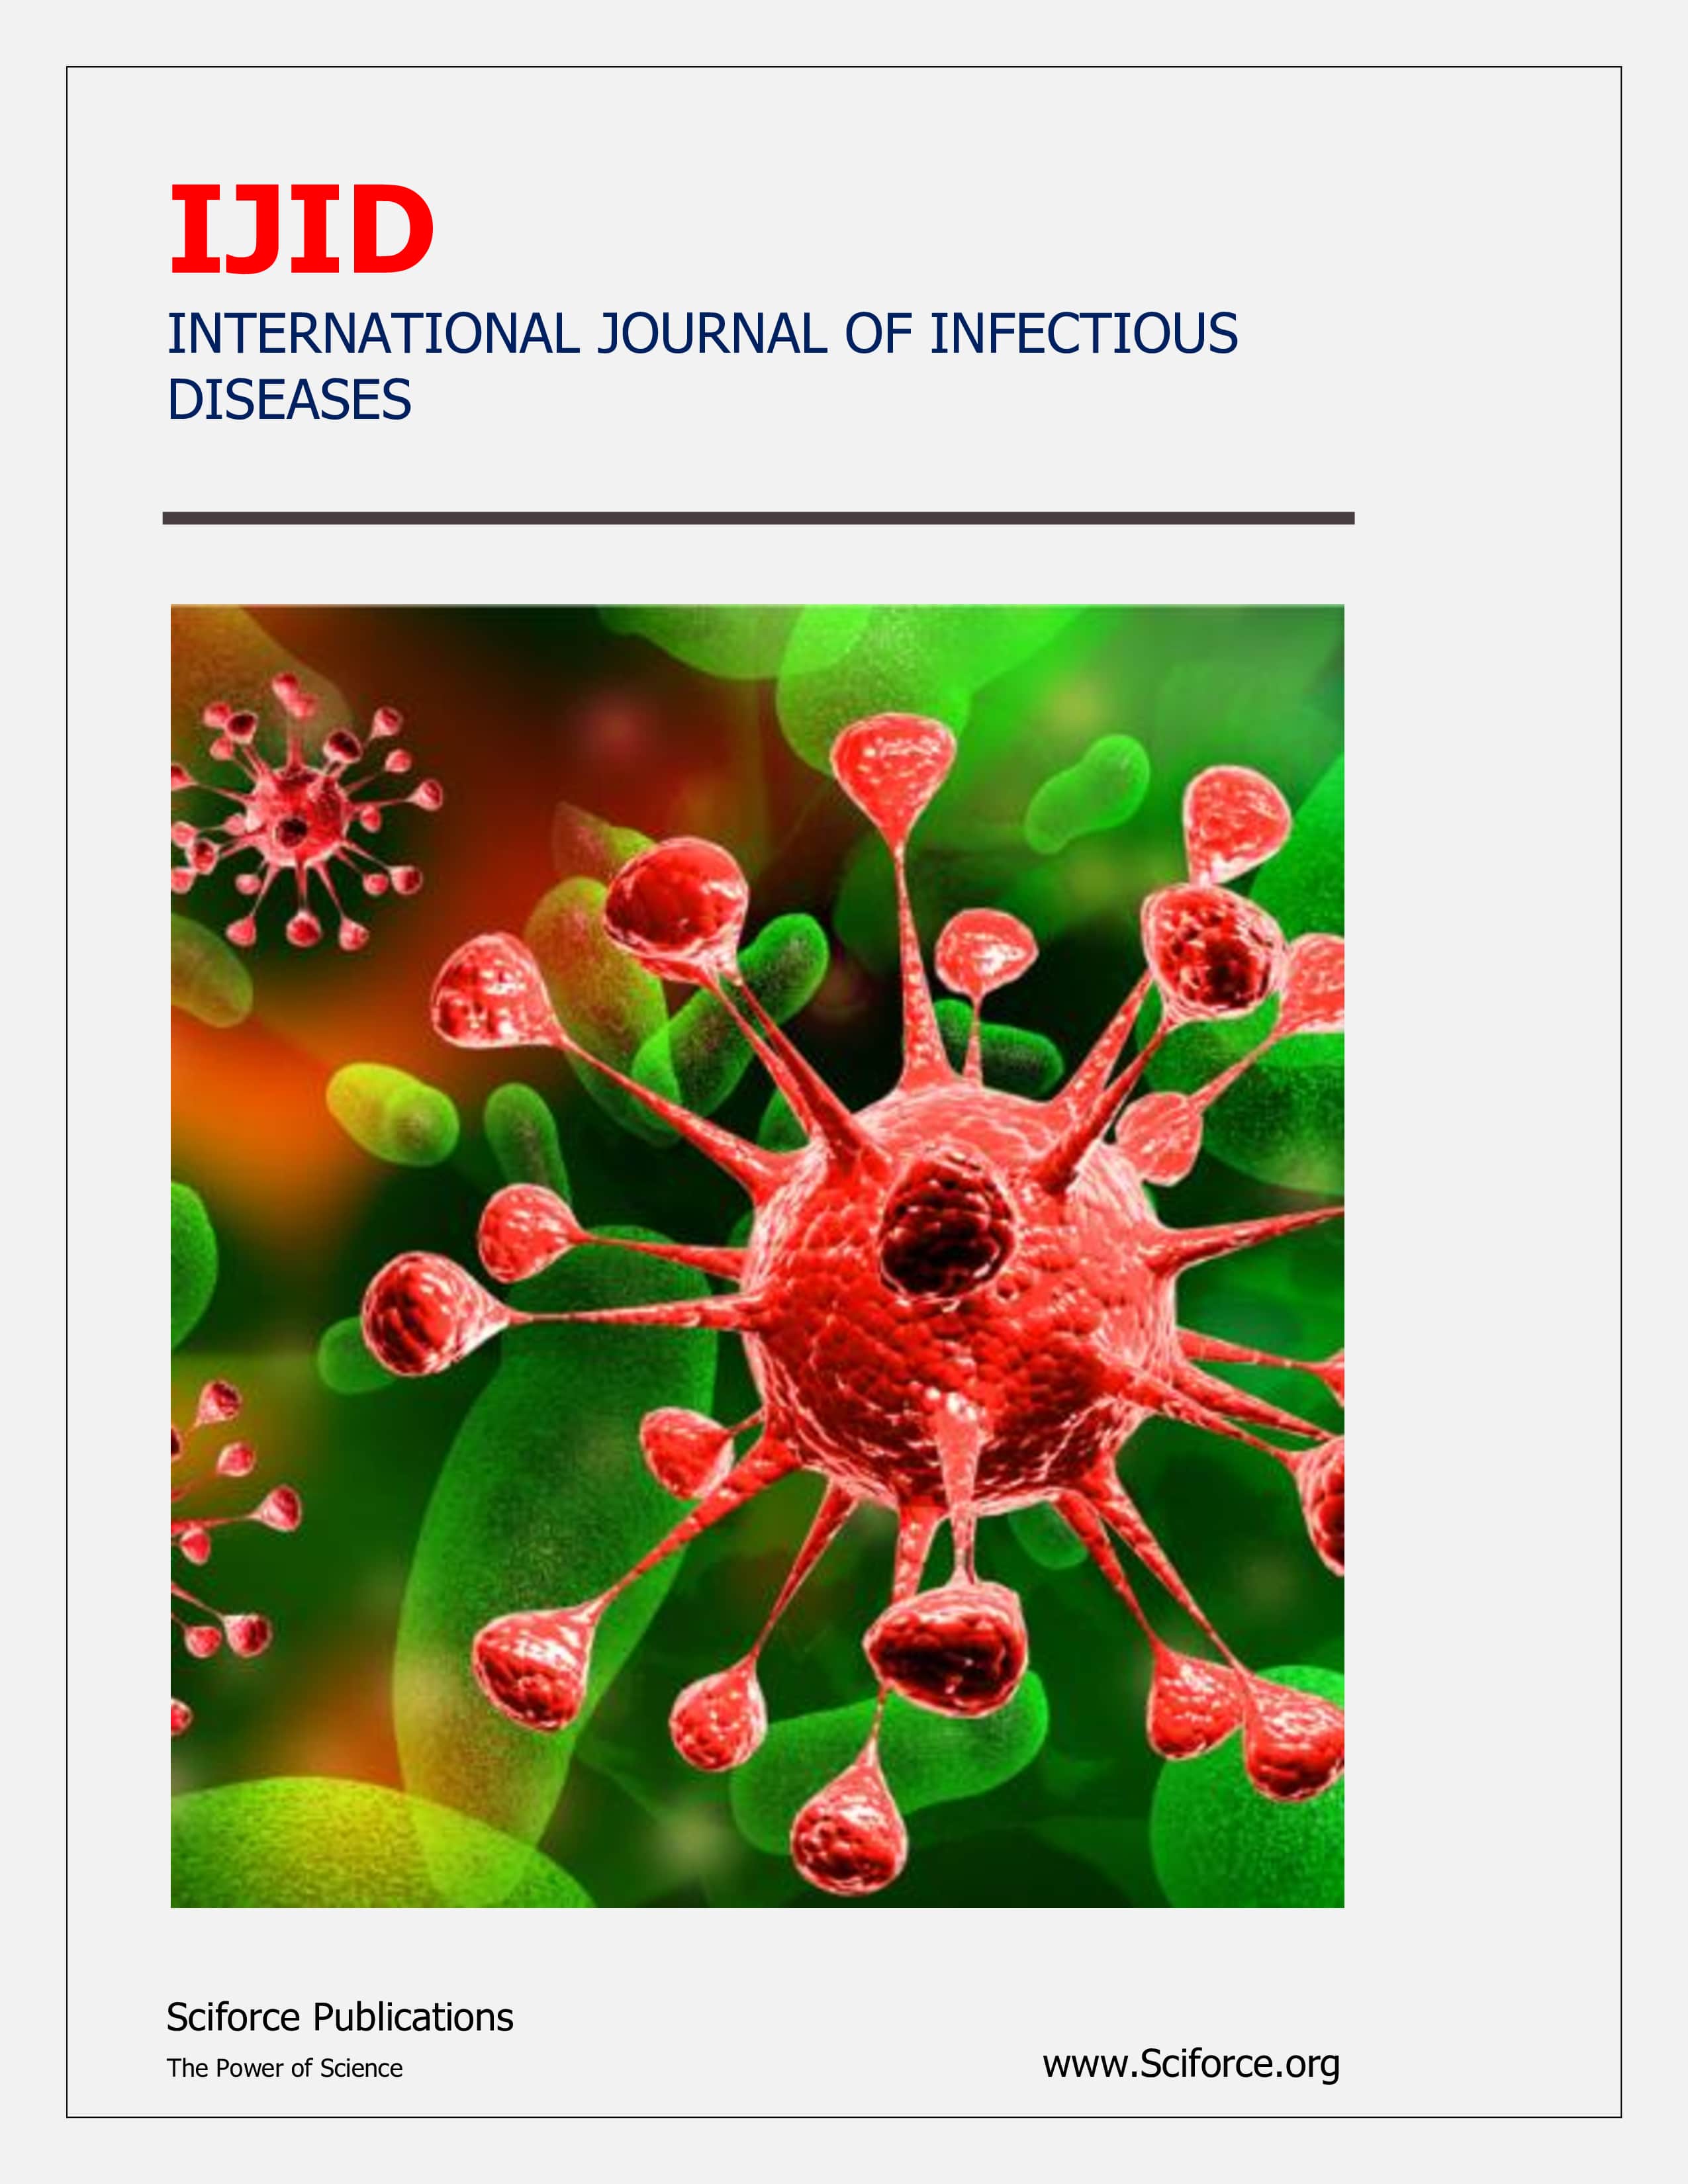 International Journal of Infectious Diseases and Preventive Medicine